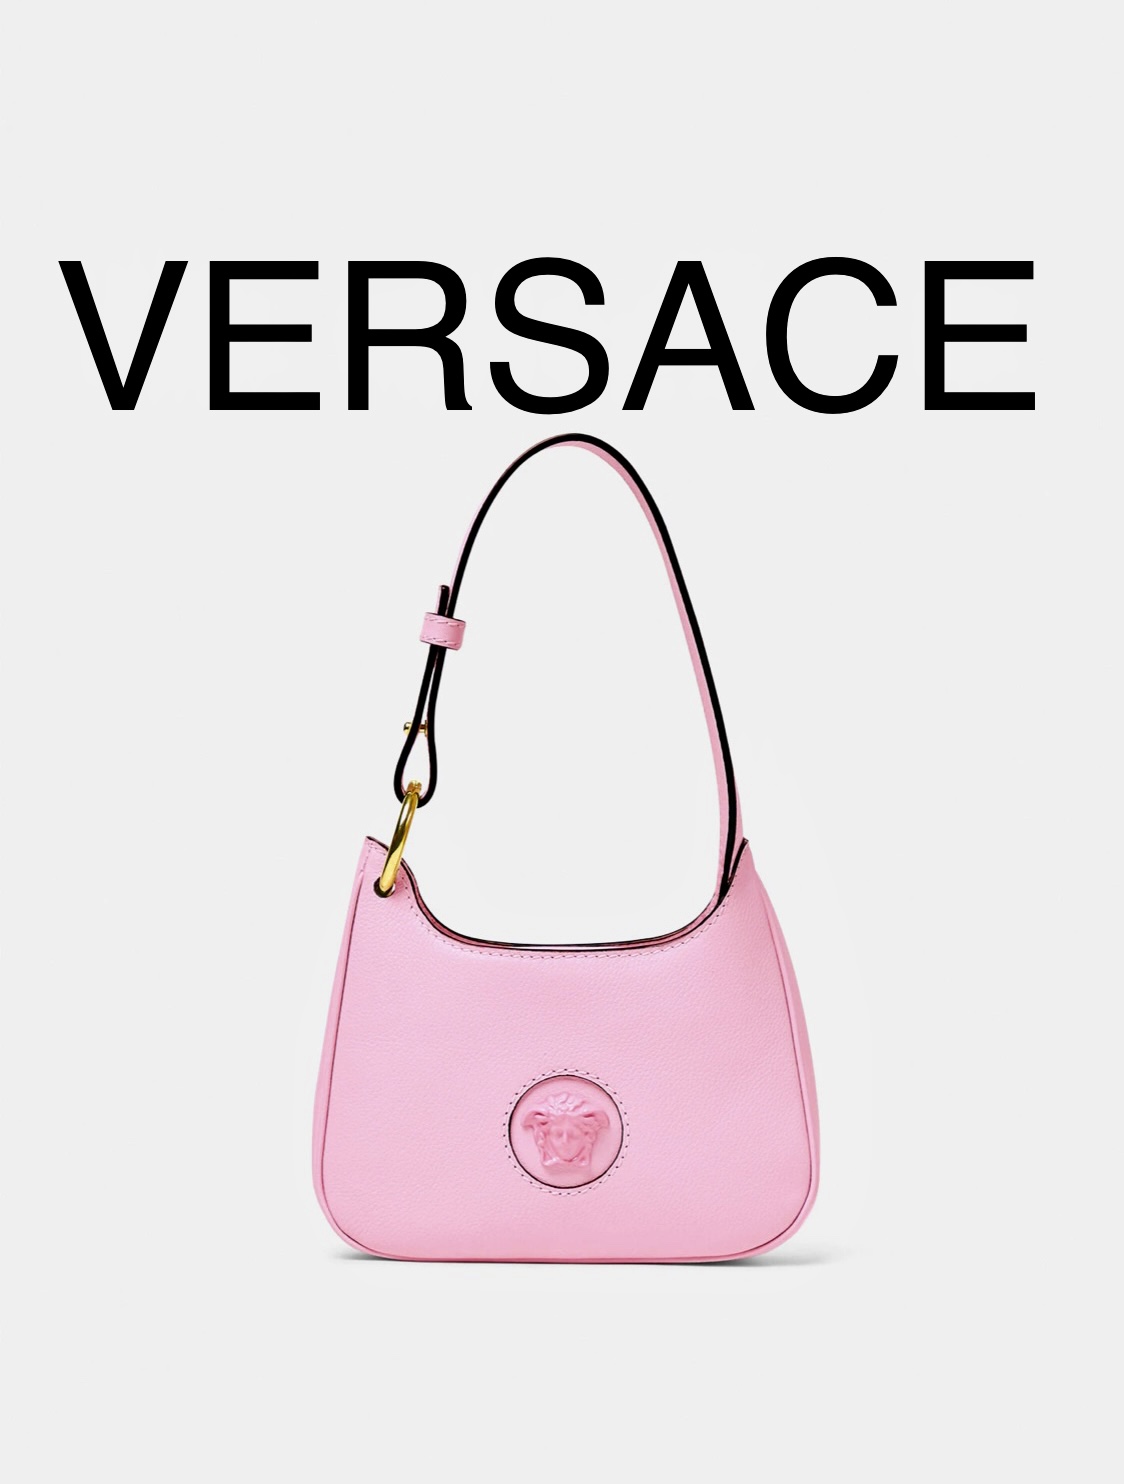 VERSACE
LA MEDUSA SMALL HOBO BAG
A stunning evening design with a contemporary curved silhouette, the small hobo bag is crafted in Italy from lightly grained calf leather. The striking design is a perfect companion for both day and evening looks, boasting a three-dimensional Medusa plaque - iconic décor that was discovered on the doors of the brand's first headquarters in Milan. Easily styled on the shoulder or across the body, the versatile design features an adjustable strap.
-La Medusa plaque
-Top handle
-Flat internal pocket
-Embossed logo on reverse
-Outer fabric: 100% Calf leather
-Lining: 100% Cotton
-Made in Italy

Size & Fit
-Length: 20 cm
-Width: 4 cm
-Height: 13 cm
-Handle drop: min 21, max 50 cm
This bag is in great condition.
Nordstrom has this brand new NOW for $1825.00
Rebag has it available in similar condition for $1170.00 and poshmark has it for $1131.00